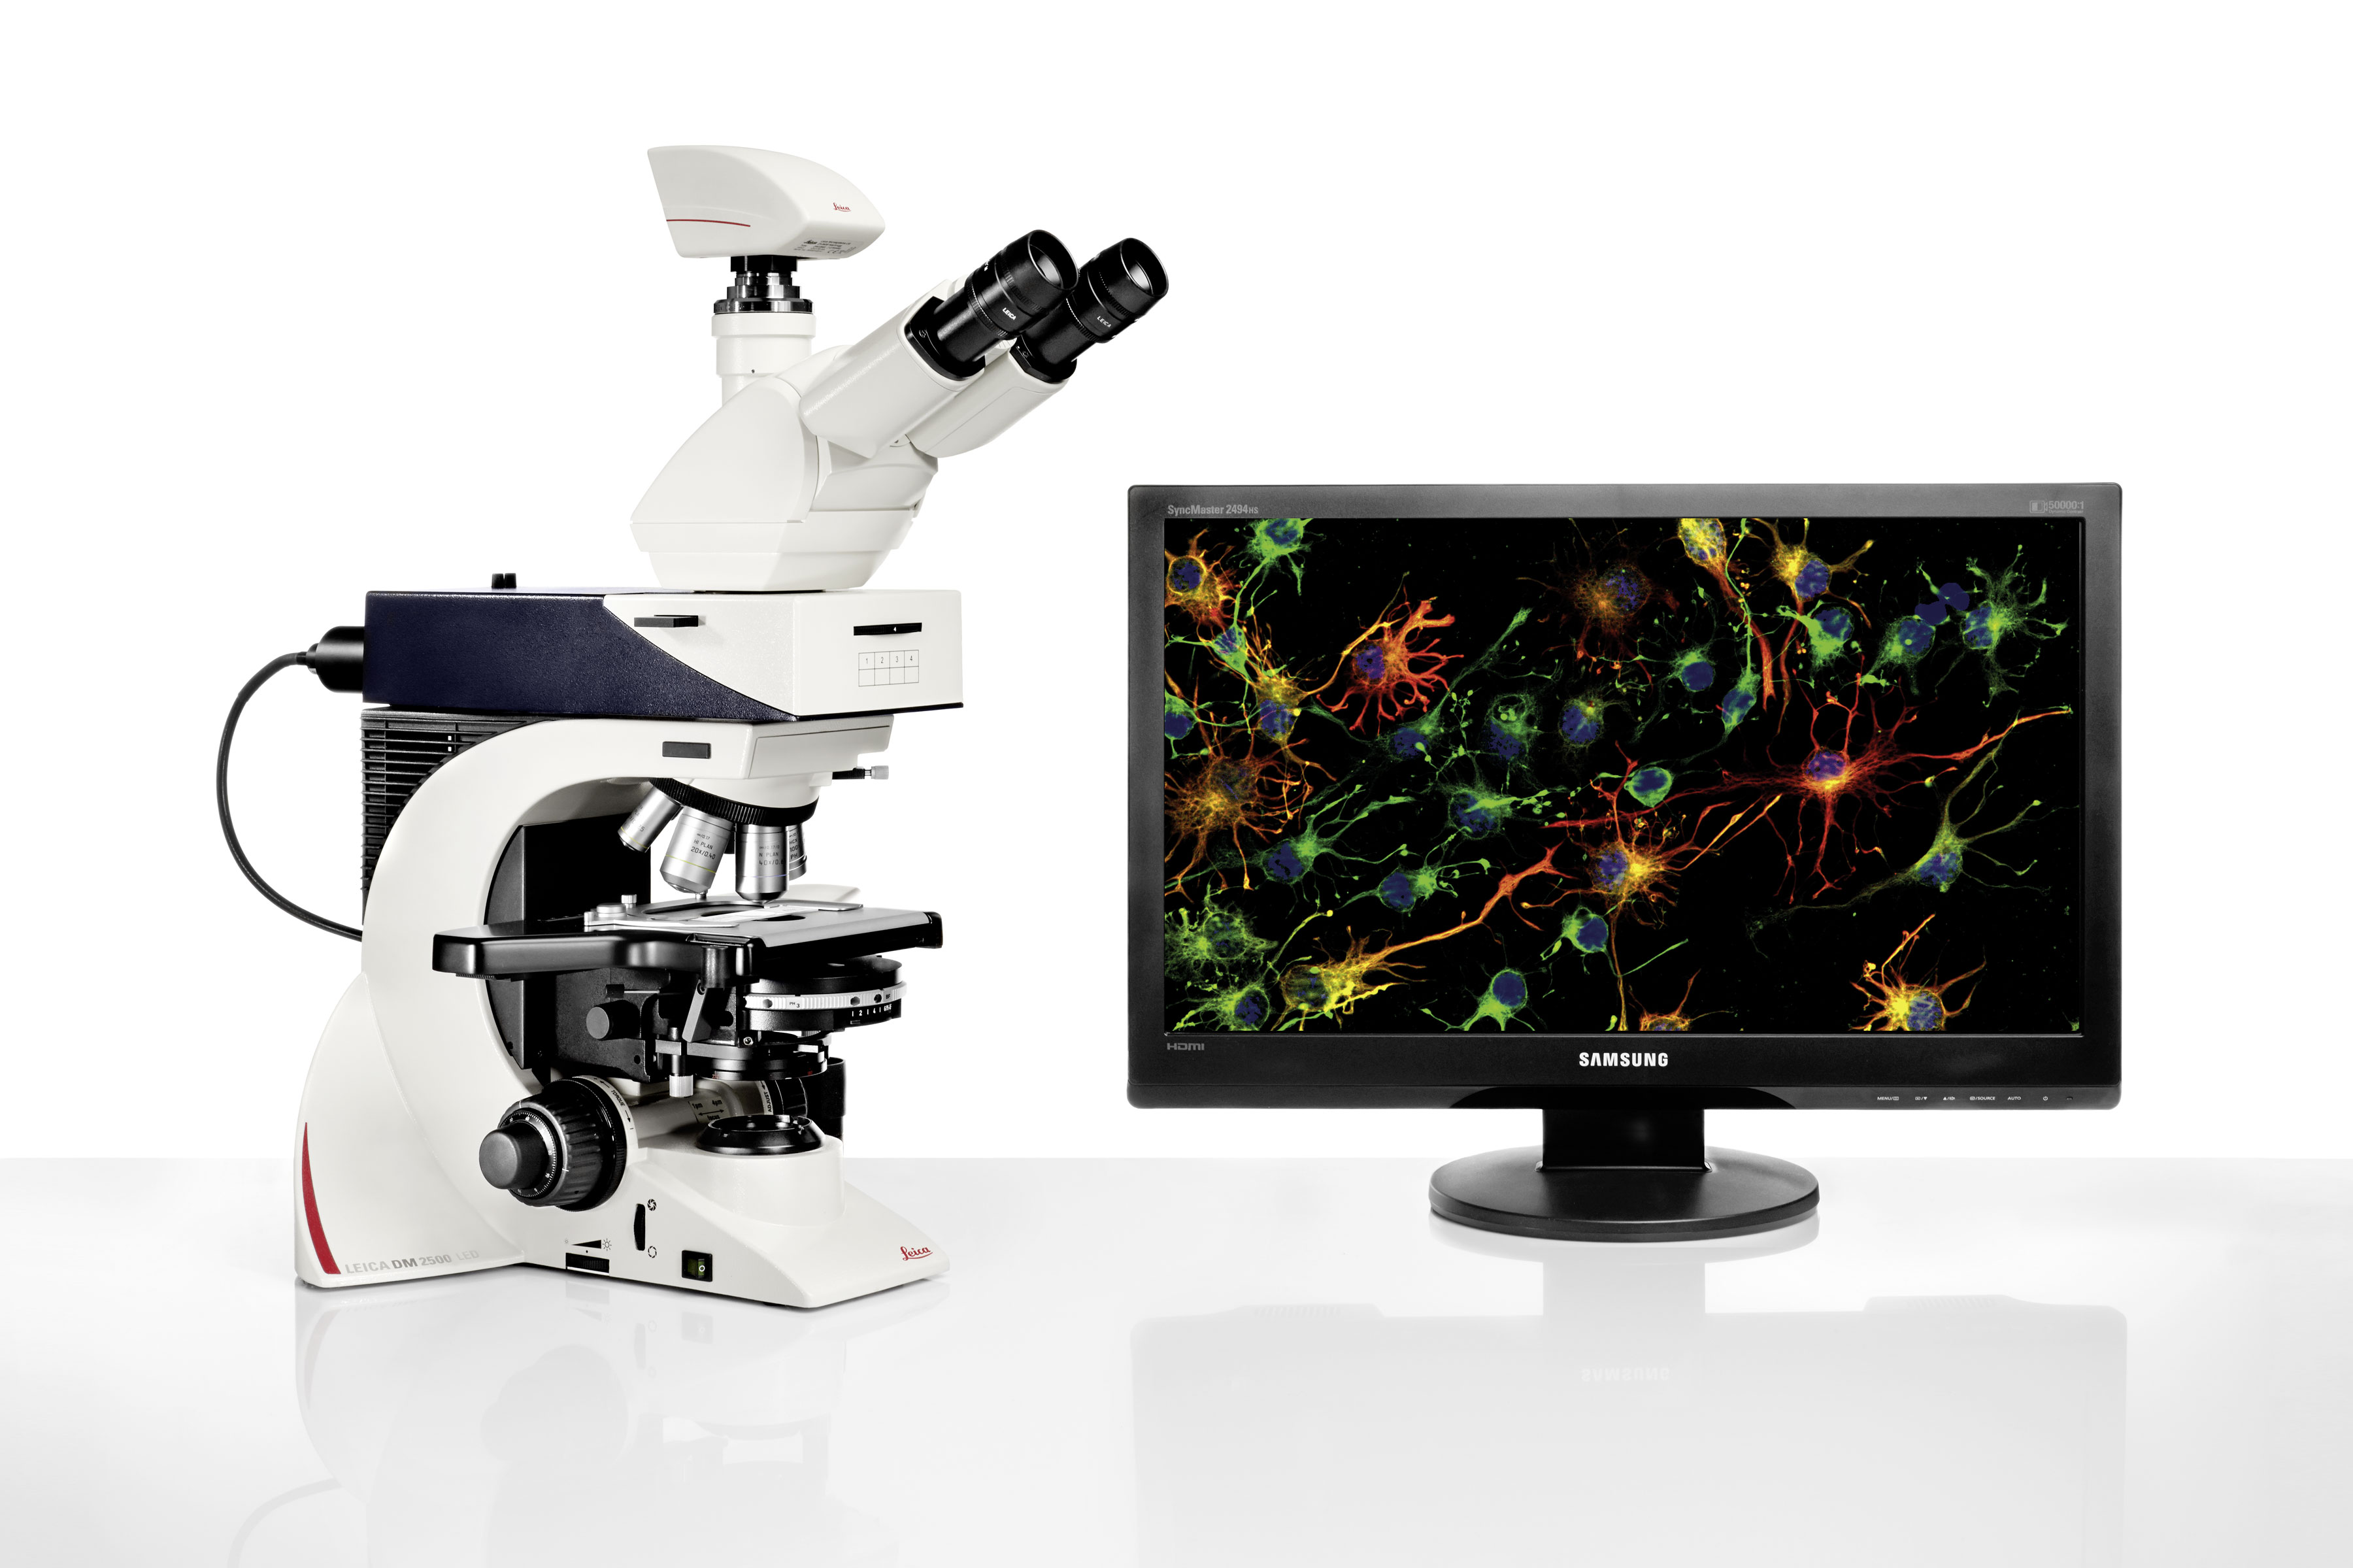 The uniquely ergonomic microscope system Leica DM2500 LED with powerful LED illumination is the ultimate tool for demanding tasks in life science applications